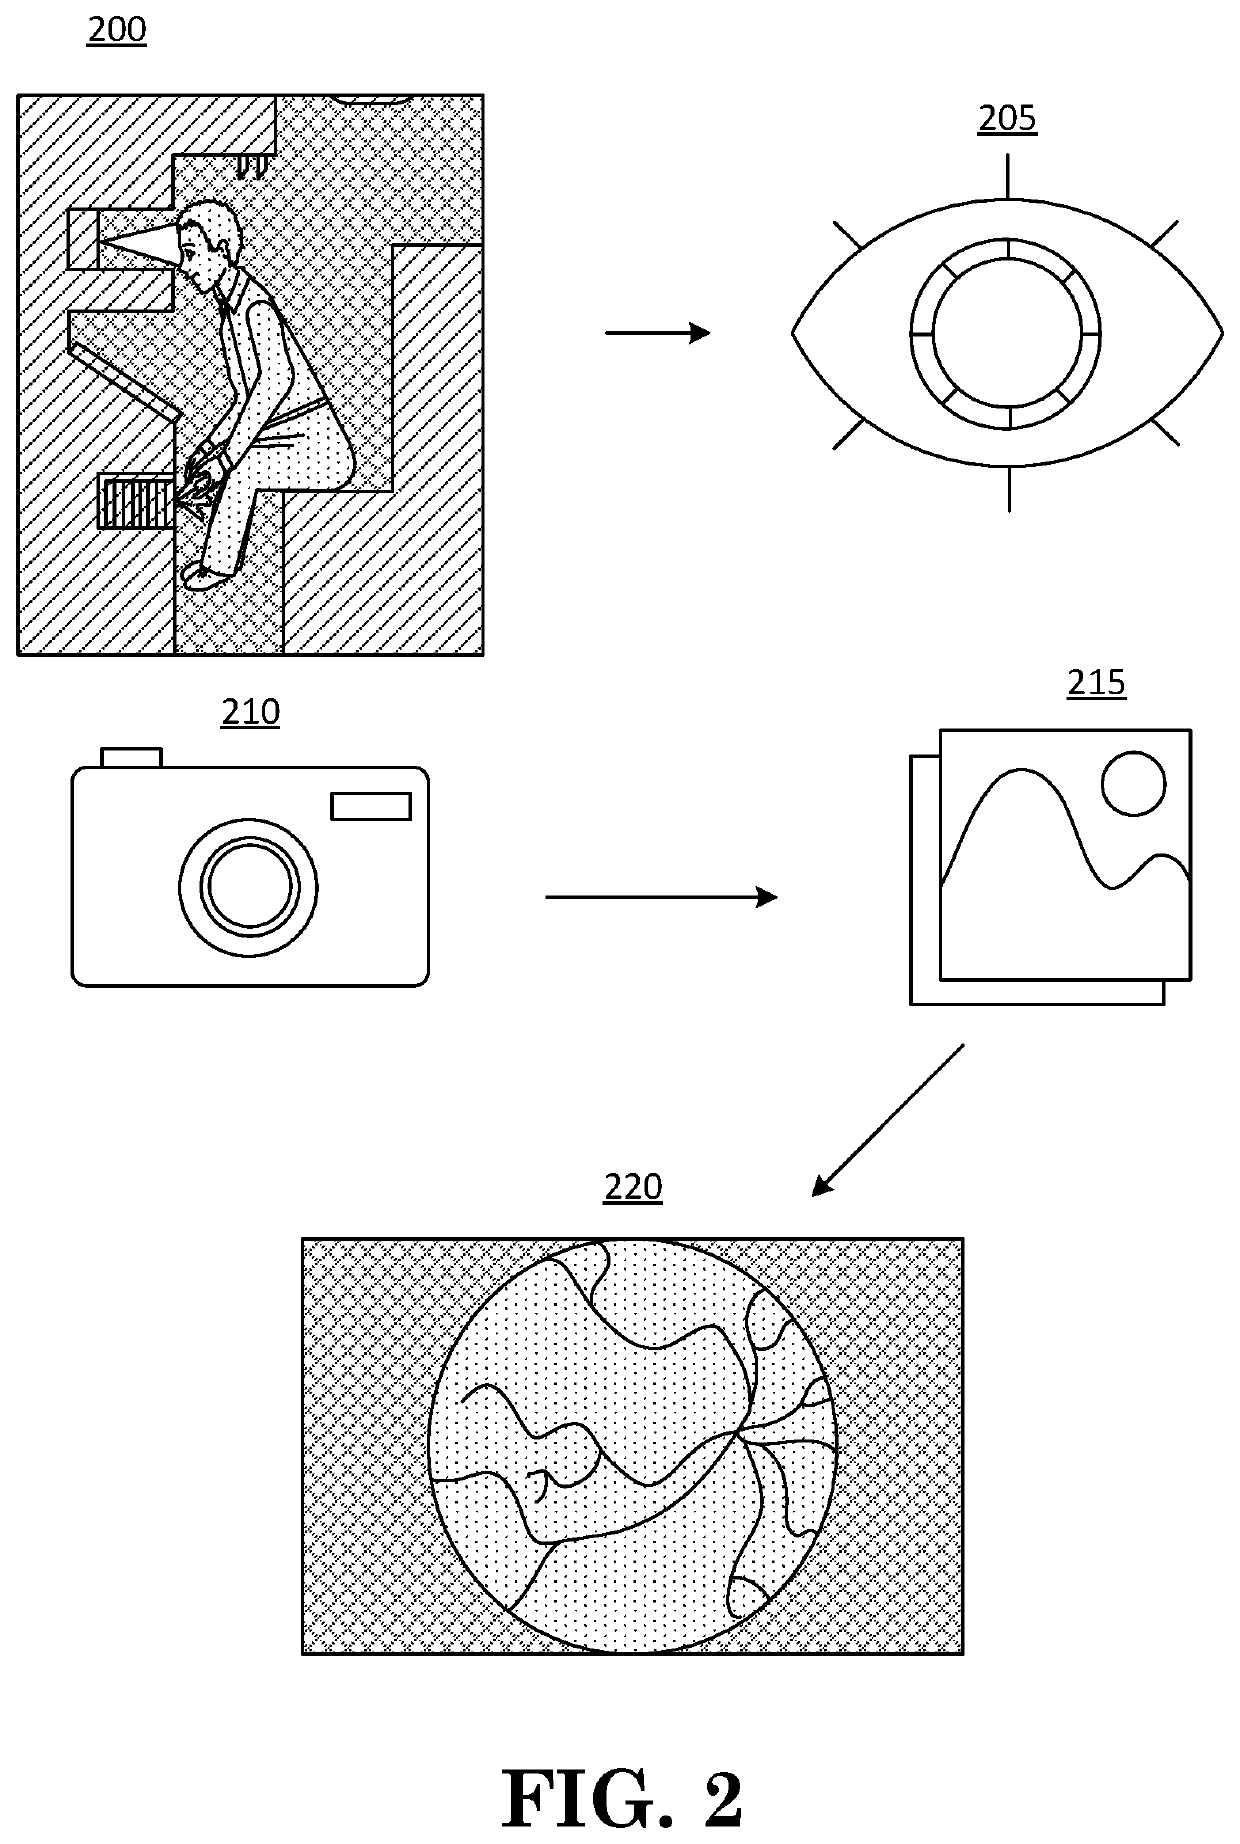 Methods and apparatus for screening for maladies by retinal scan